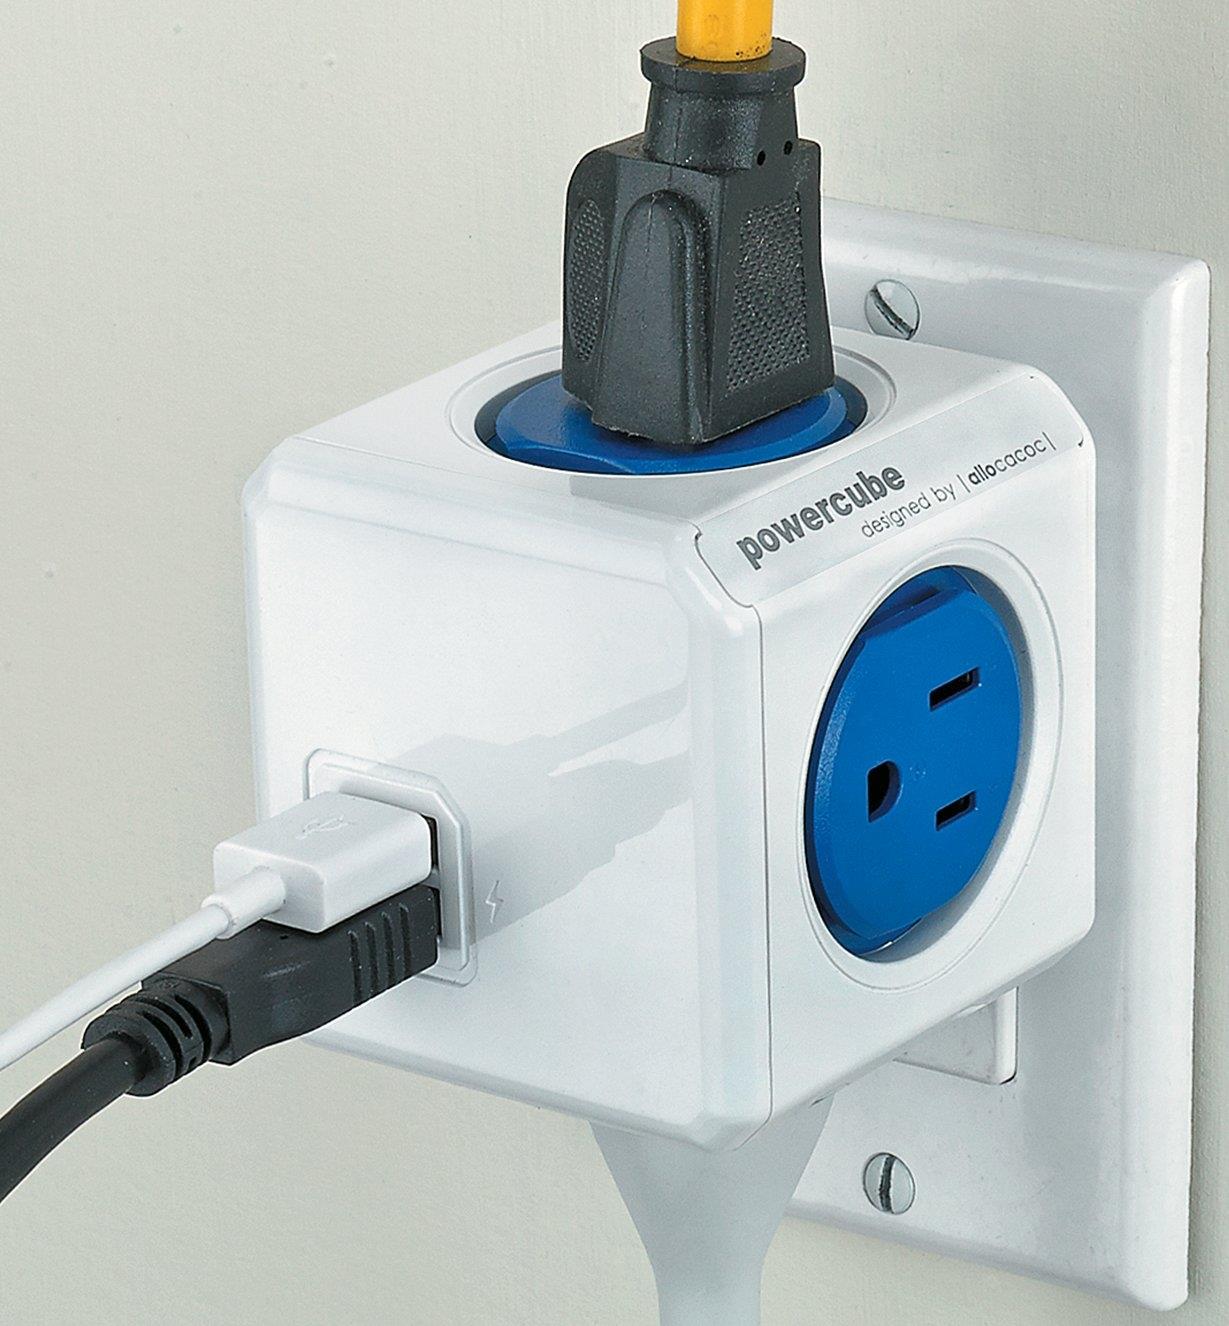 PowerCube with several cords plugged into it, plugged into a wall outlet